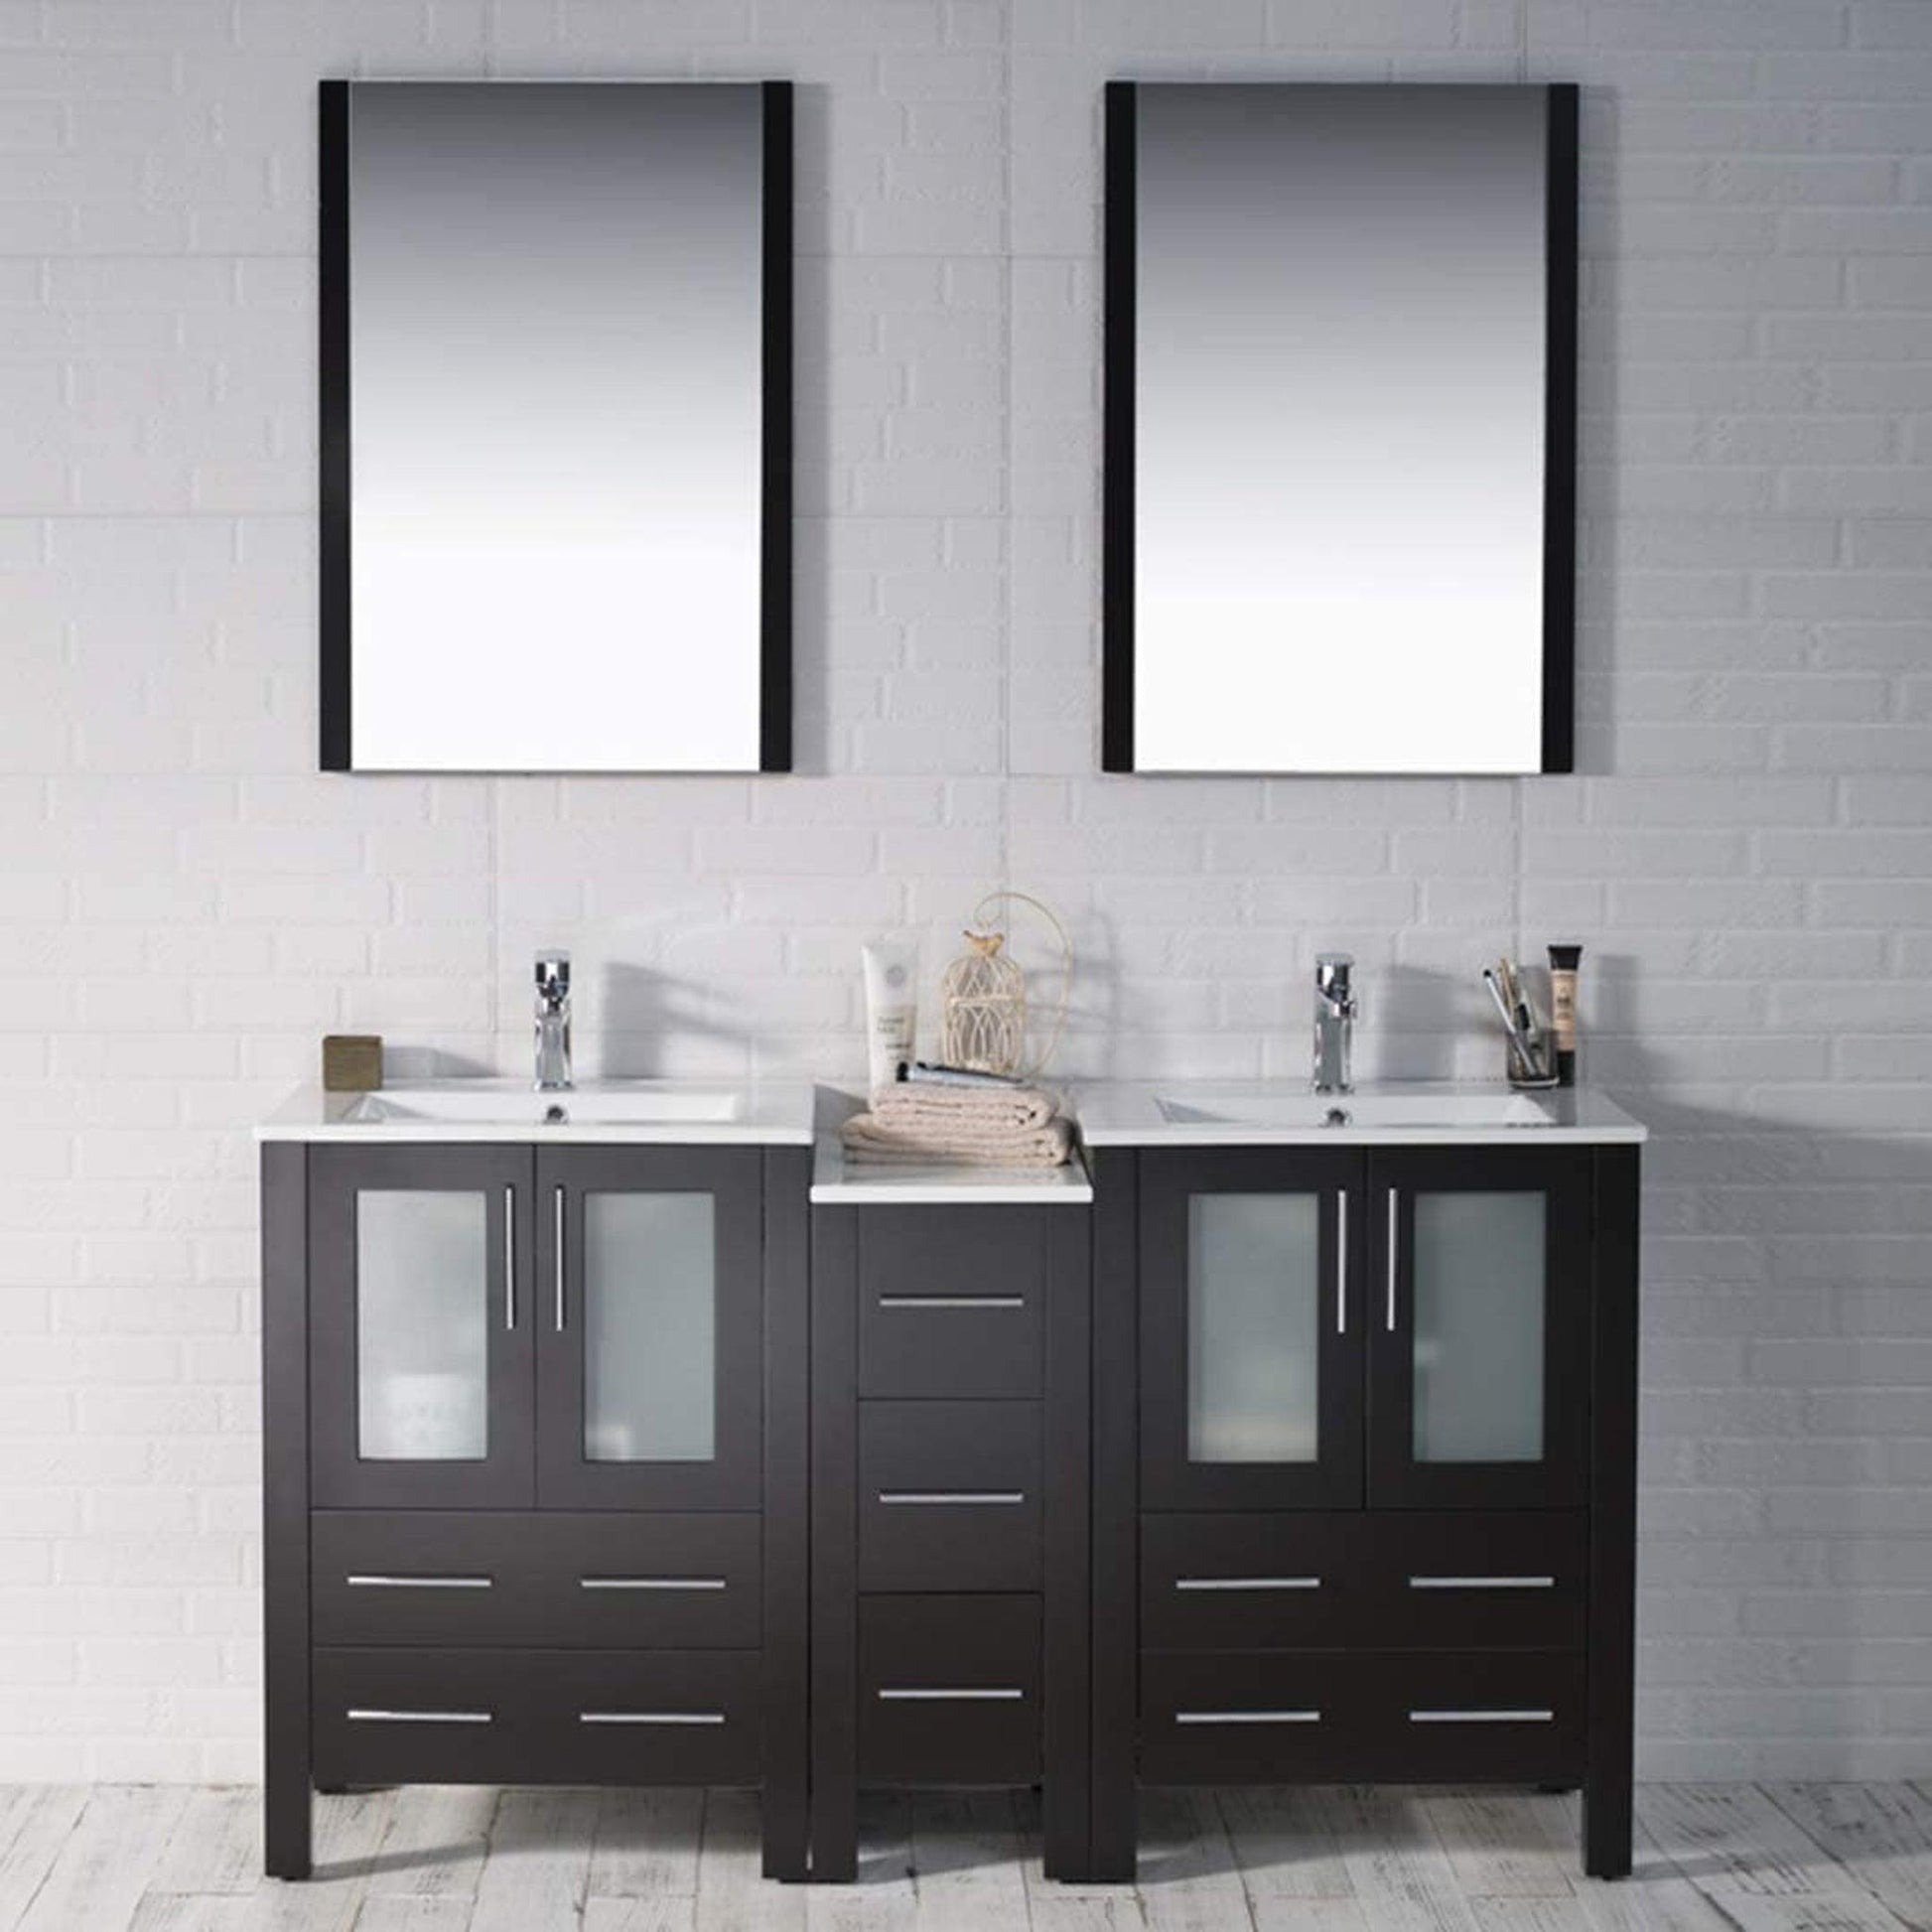 Blossom Sydney 60" Espresso Freestanding Vanity Set With Integrated Double Sink Ceramic Top and Side Cabinet